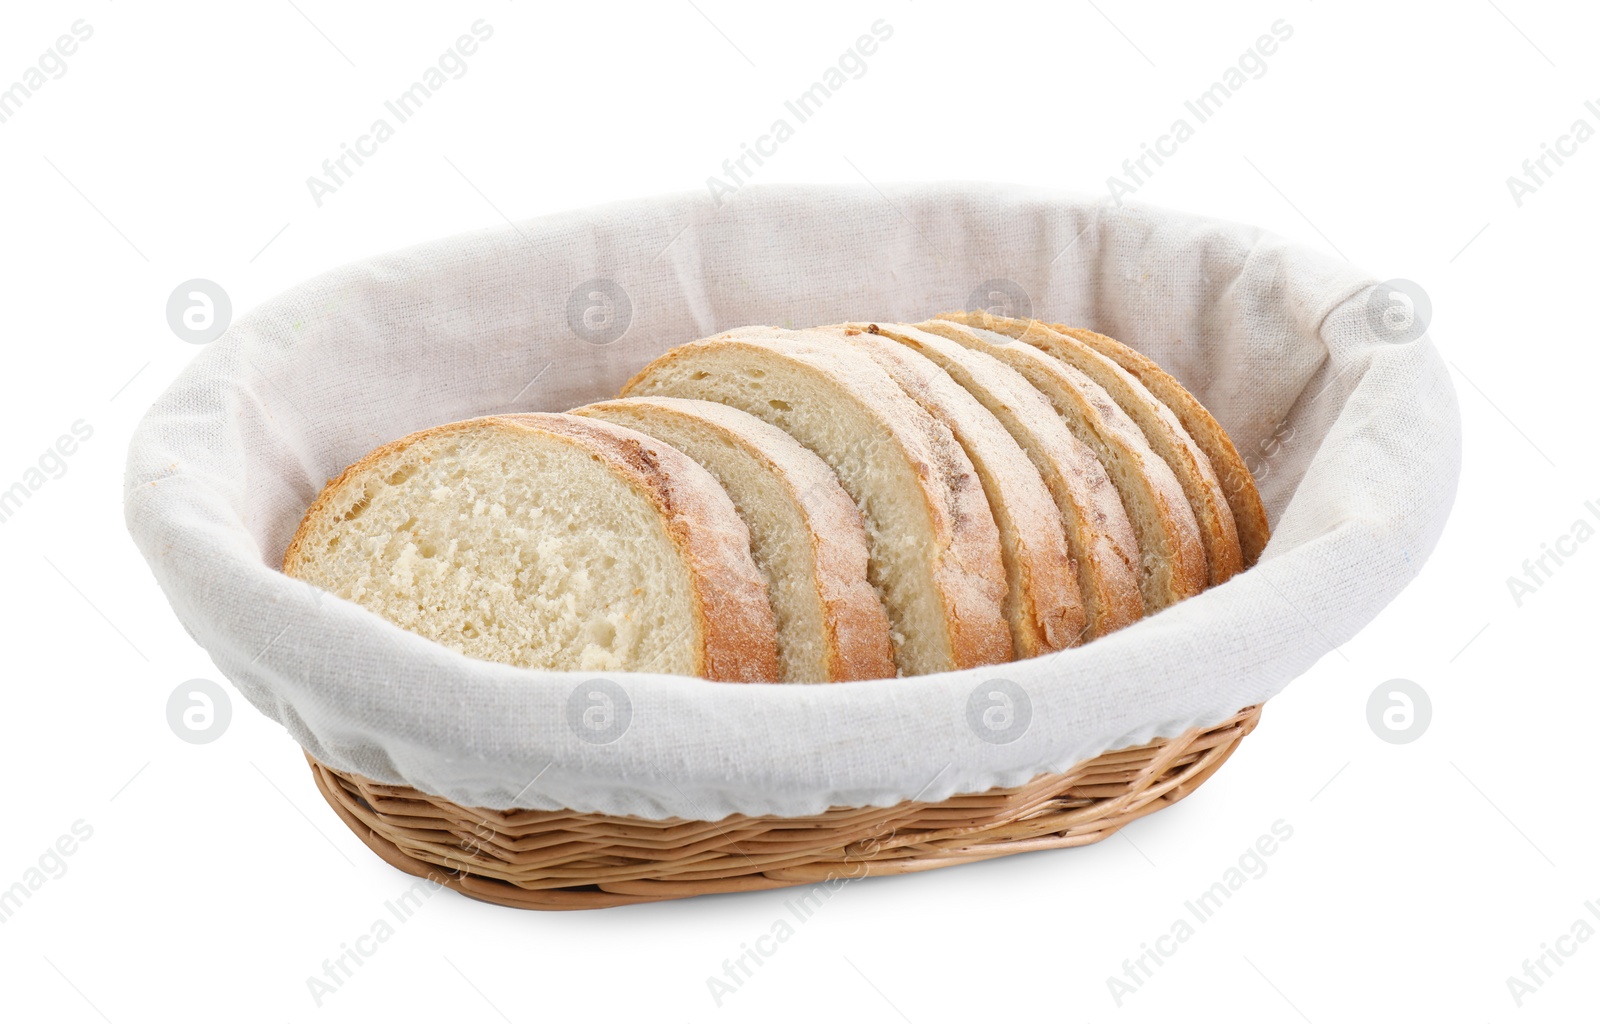 Photo of Cut fresh bread in wicker basket isolated on white